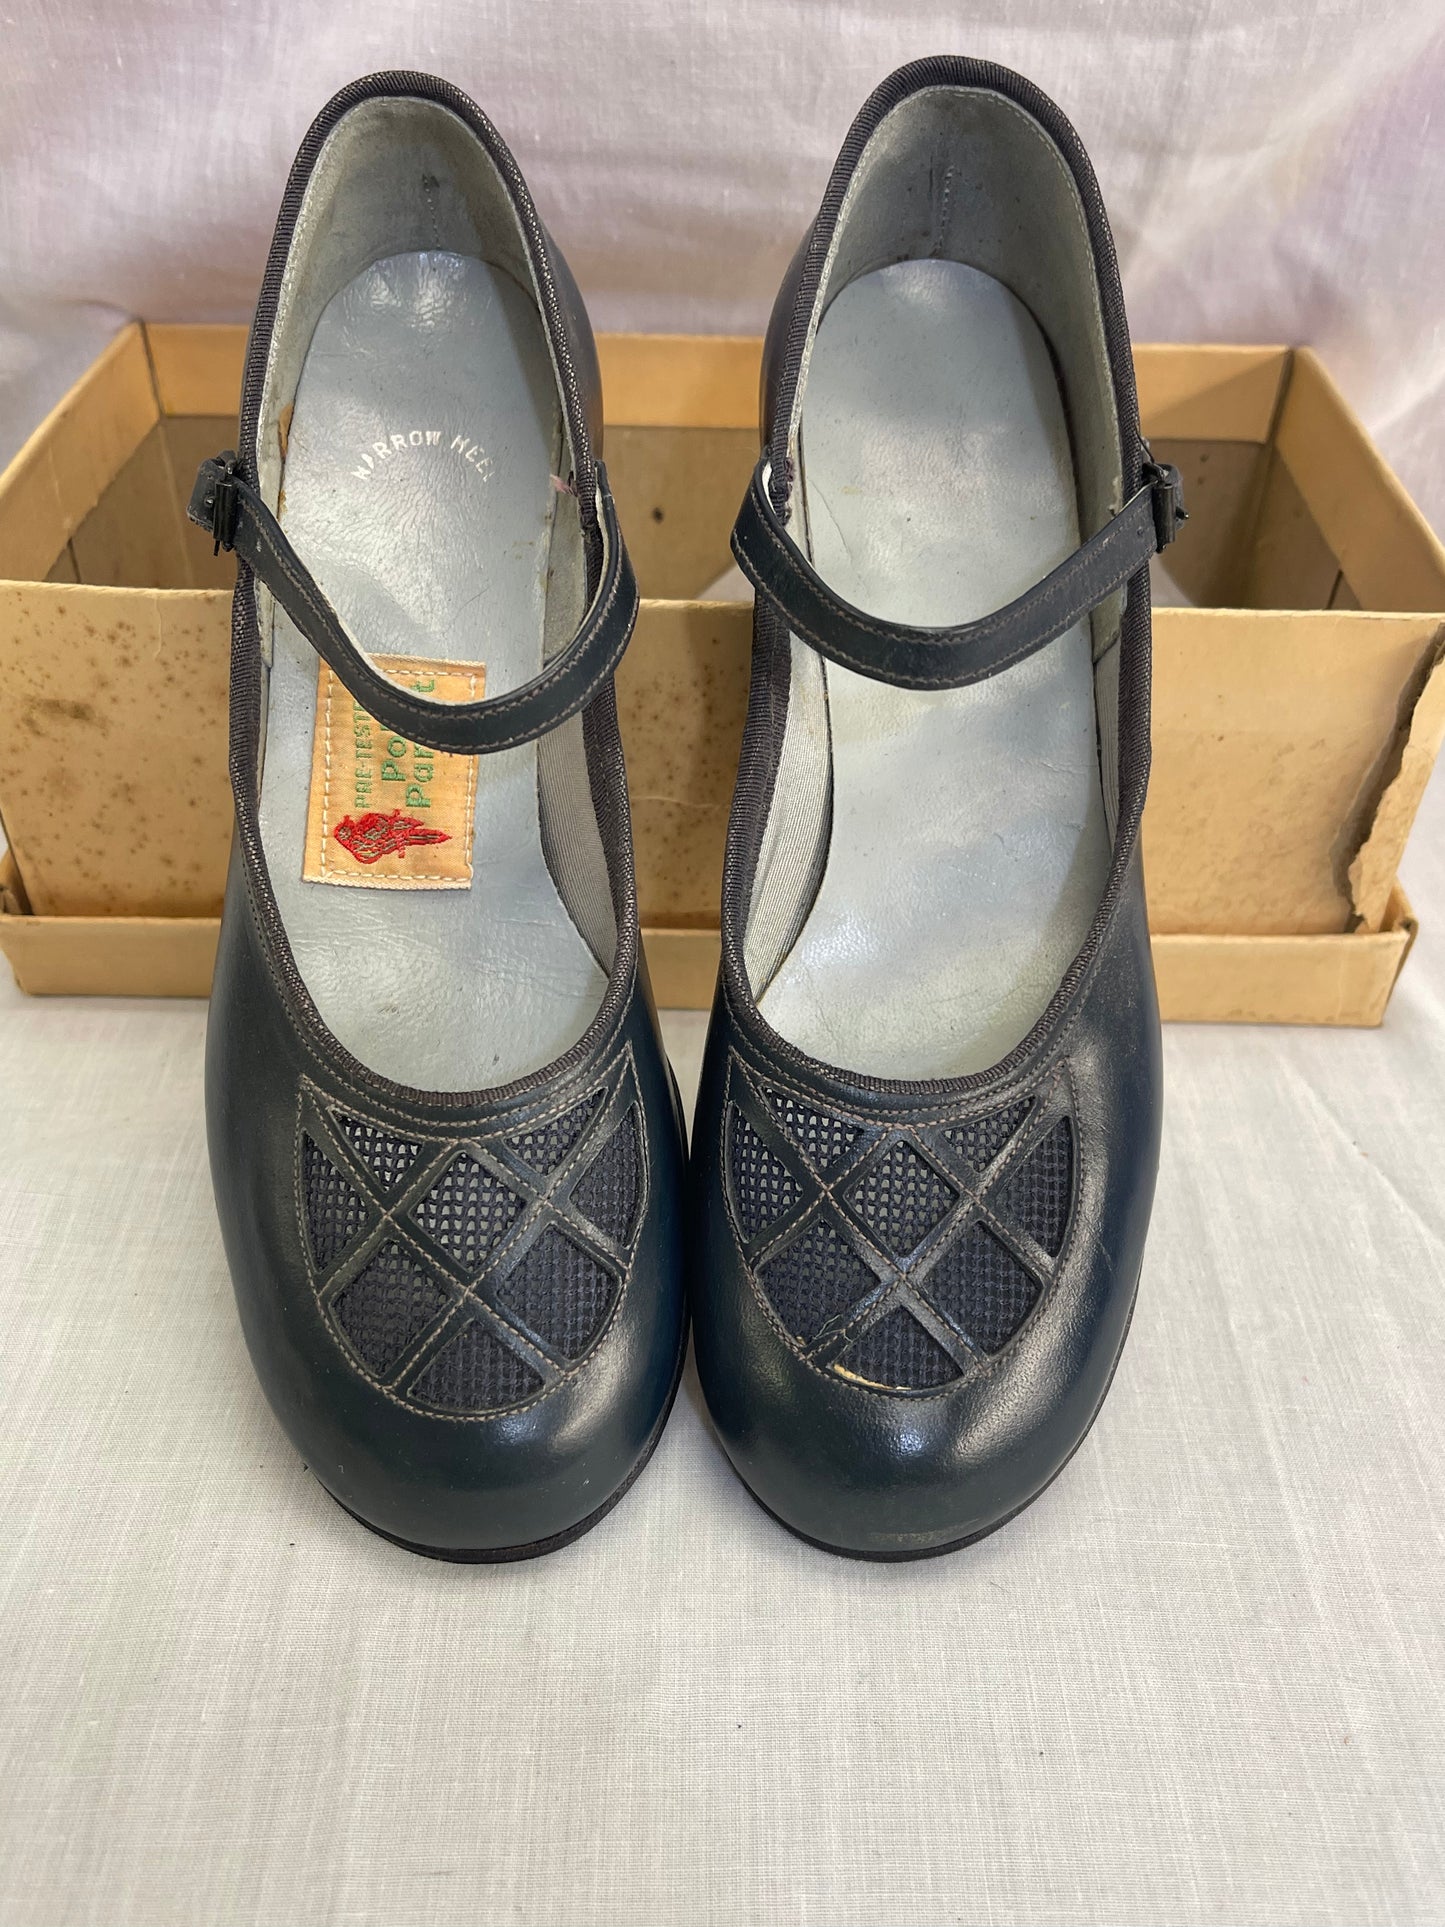 NOS Poll-Parrot Girl’s Navy Leather Shoes